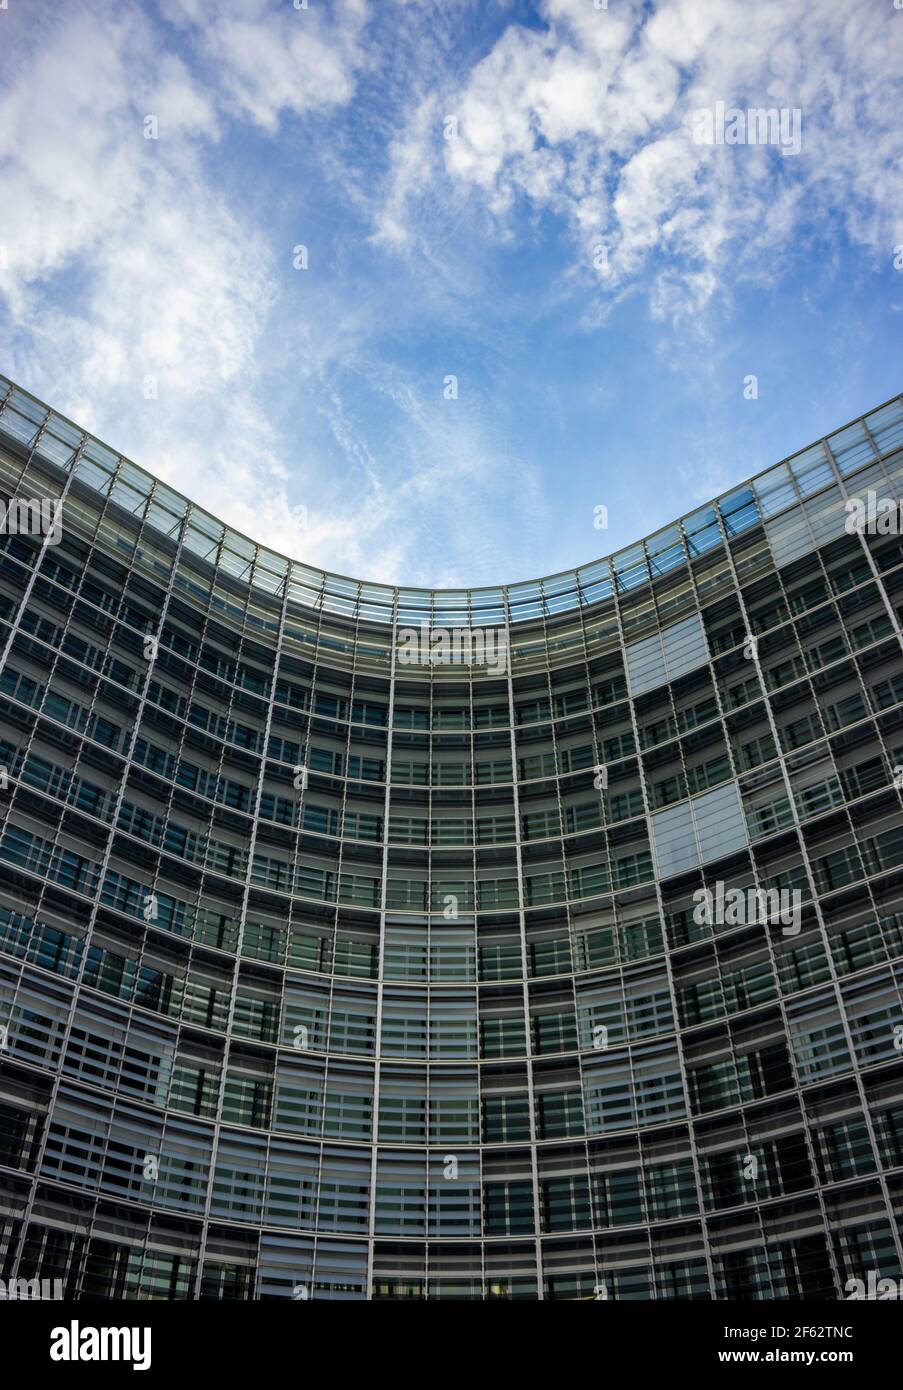 A picture of the Le Berlaymont building (Brussels). Stock Photo